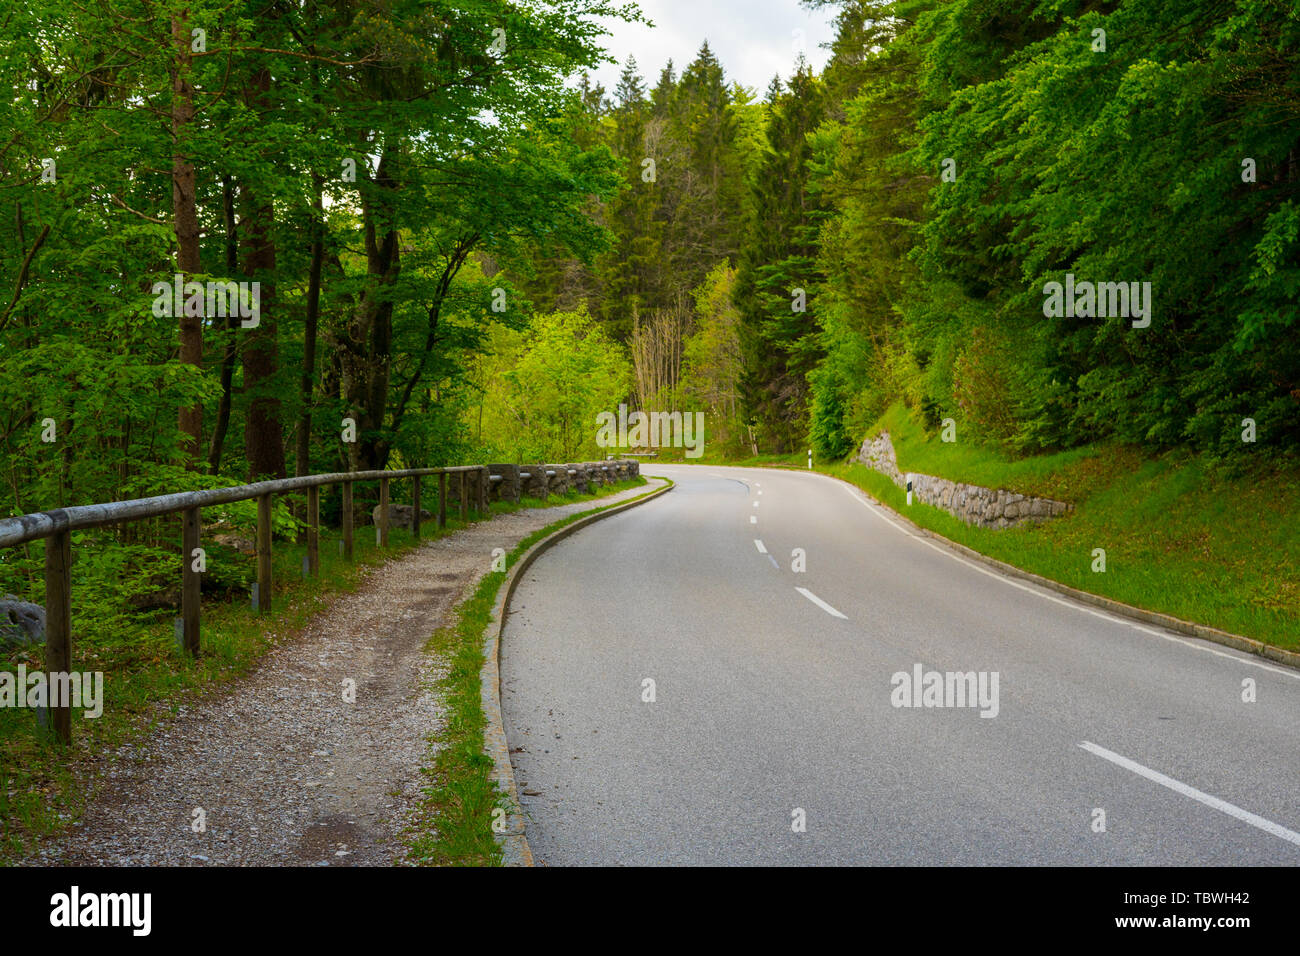 curvy street, green forest, no people, cars Stock Photo